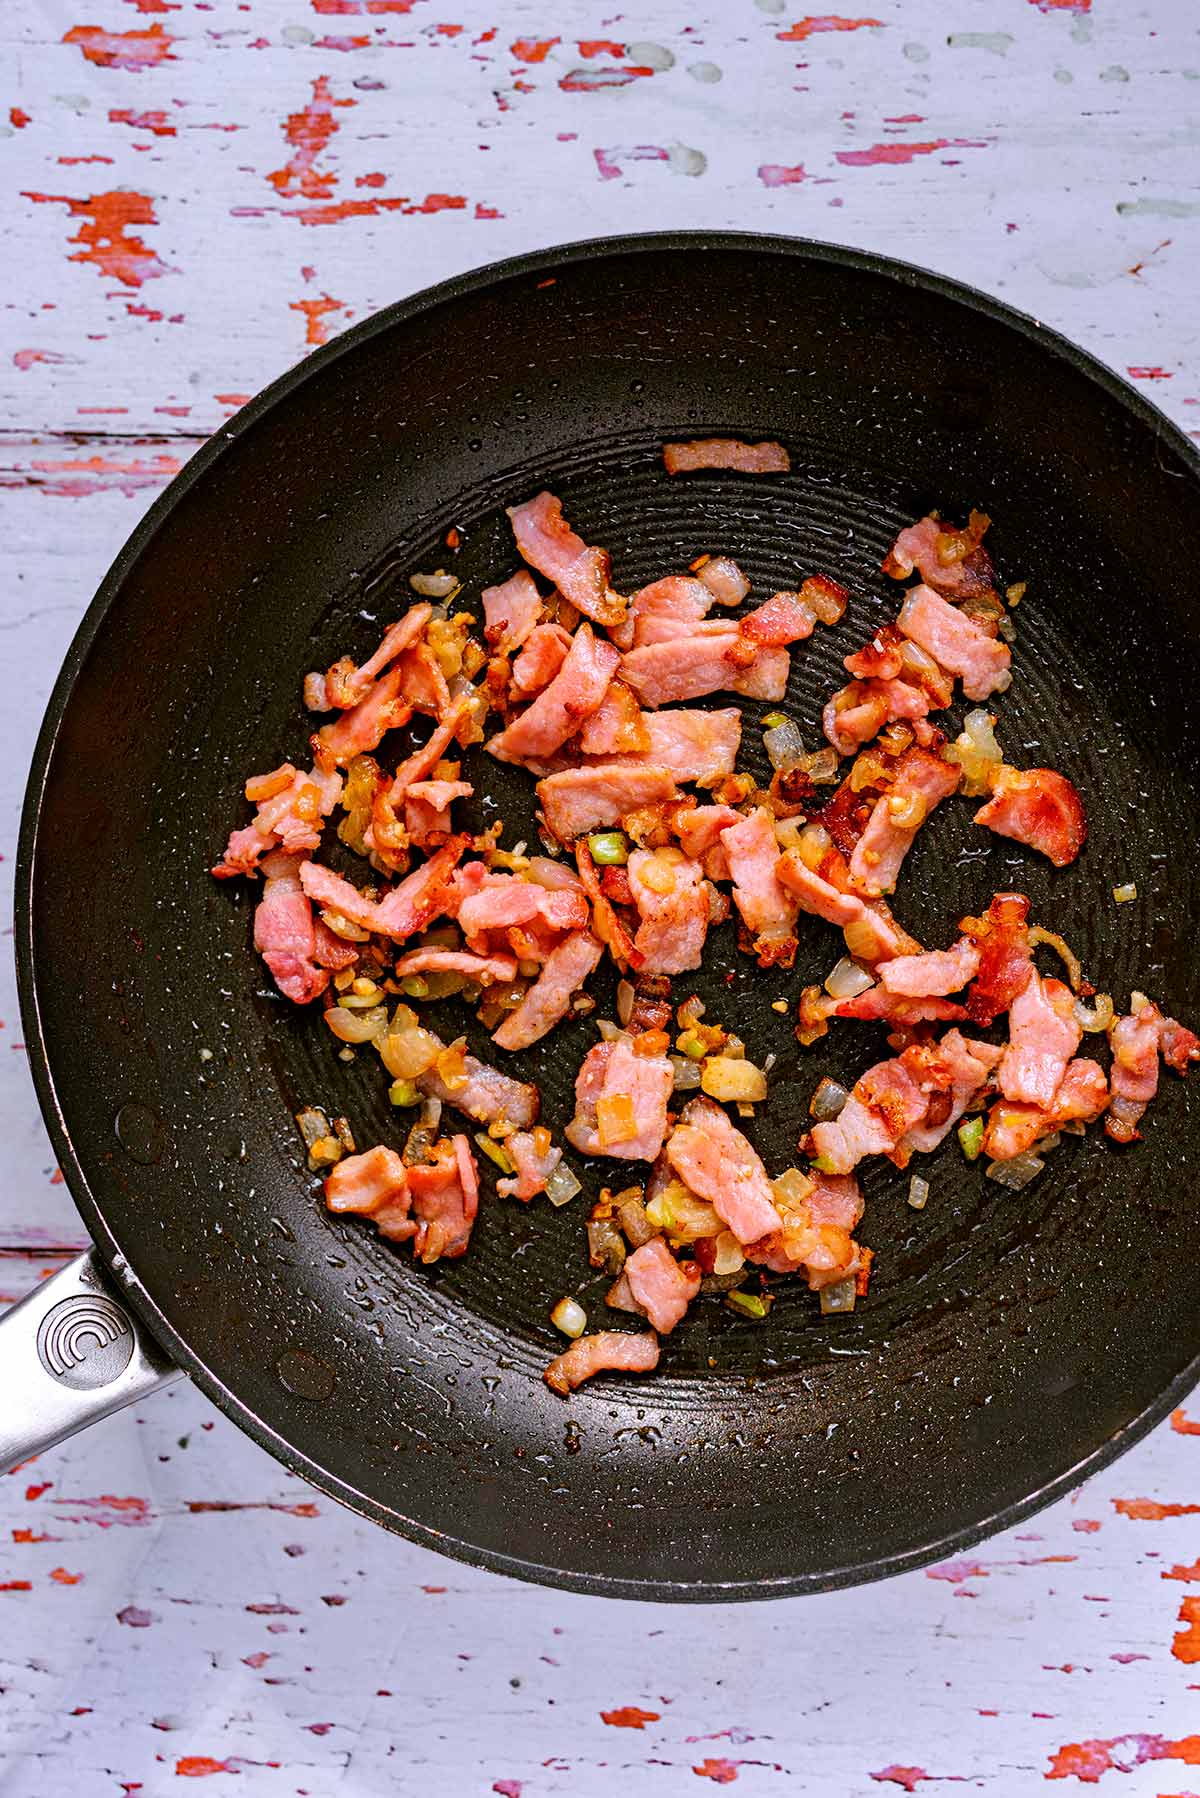 A frying pan with bacon cooking in it.